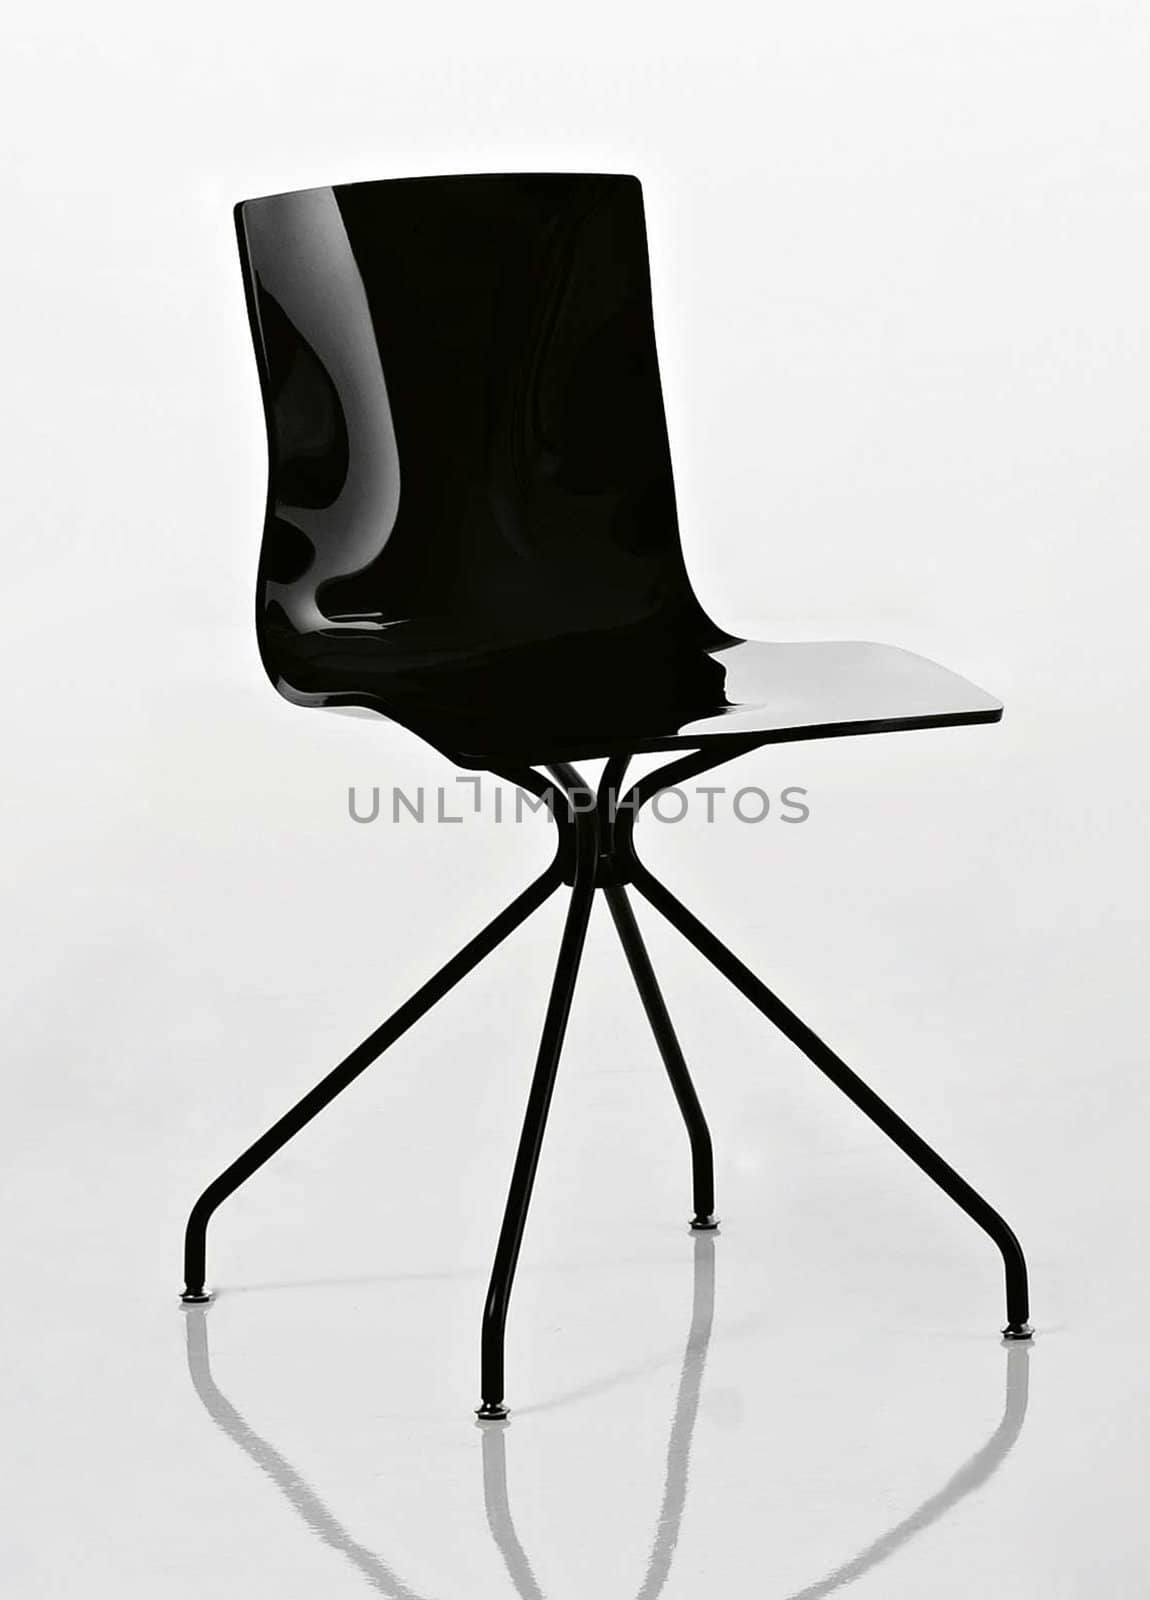 black modern chair isolated on white background